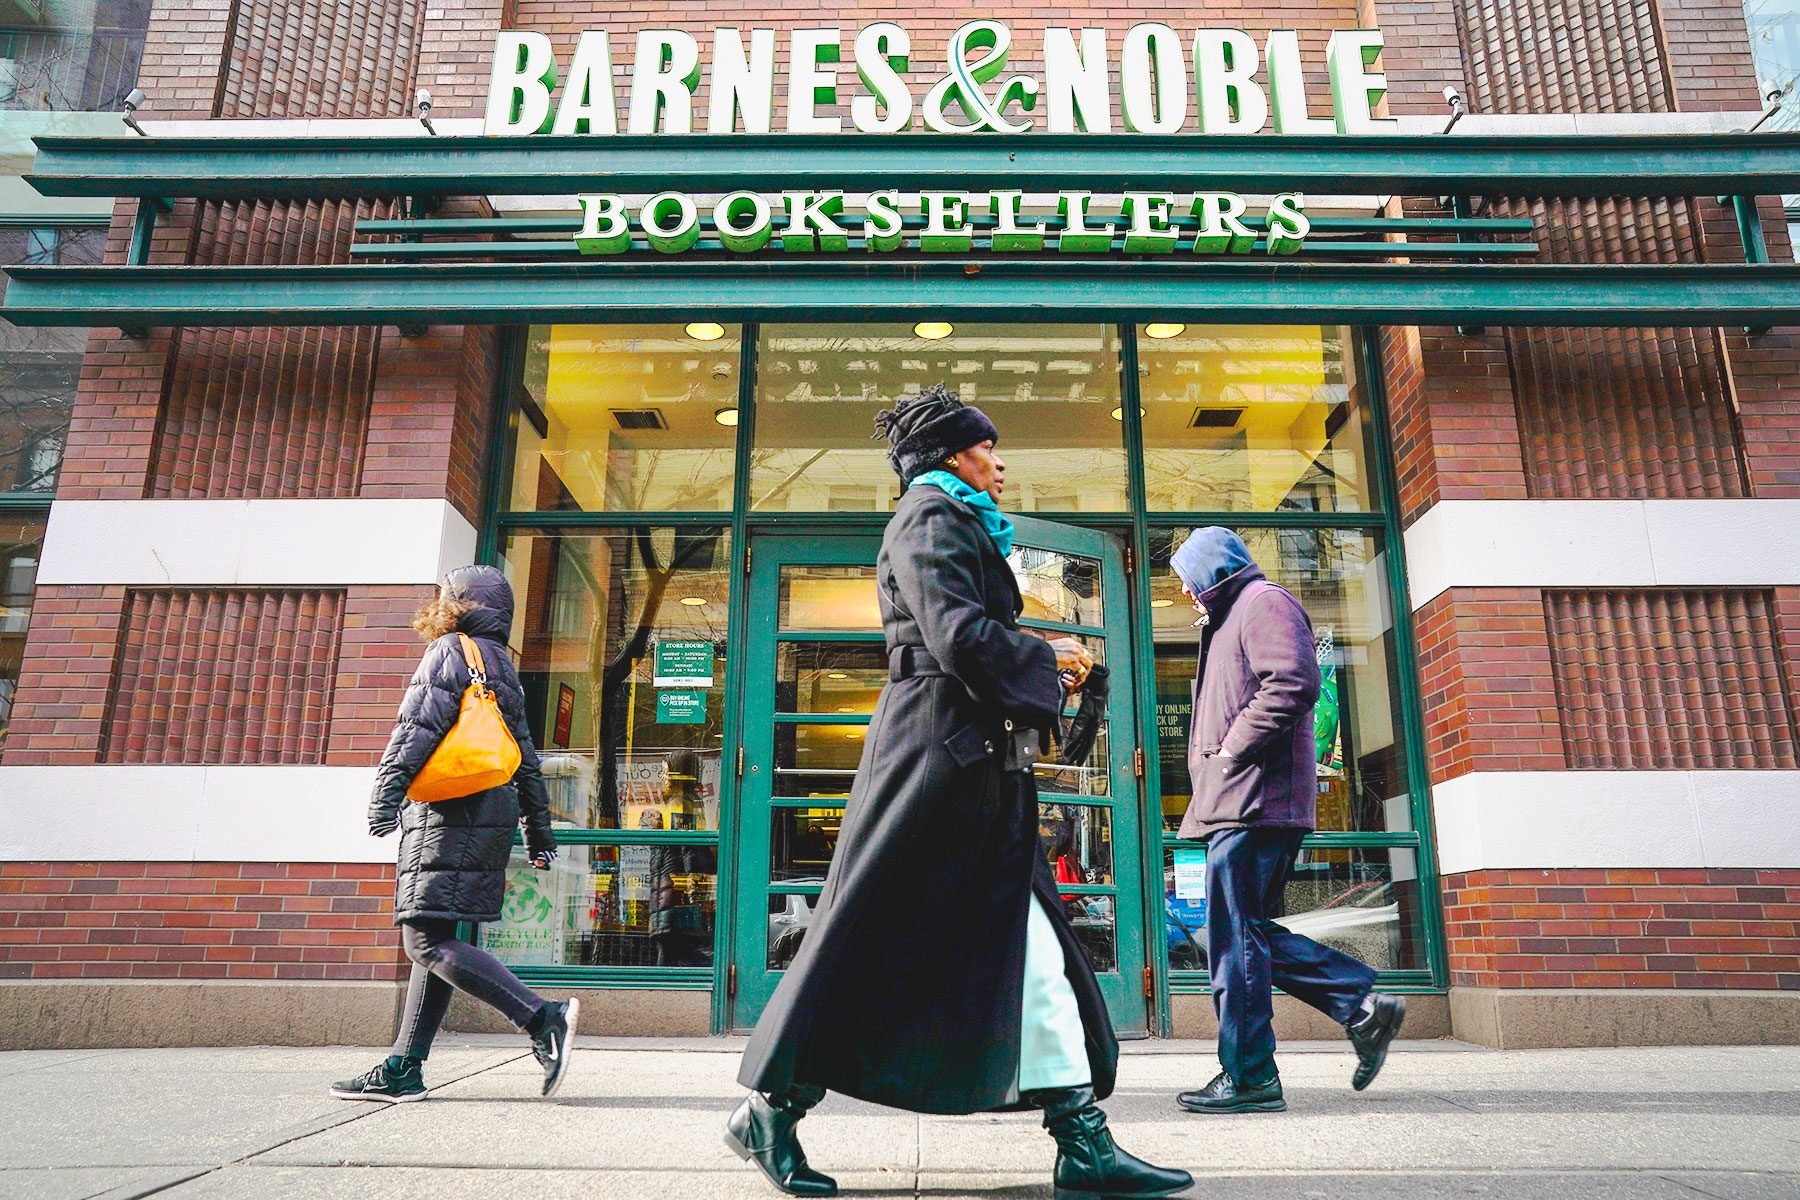 People Walk By a Barnes & Noble Bookstore